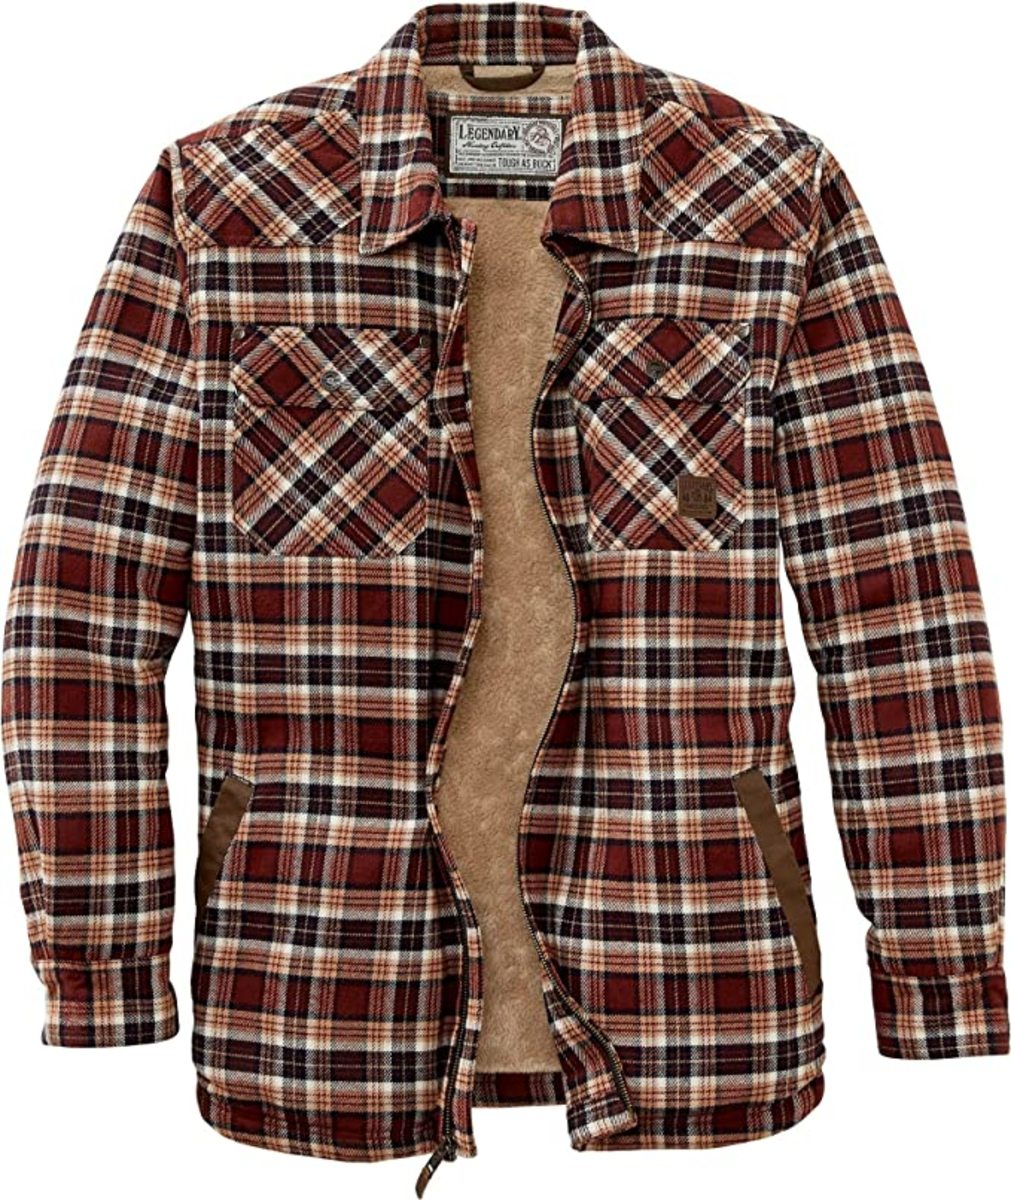 Legendary Whitetails lined flannel shirt